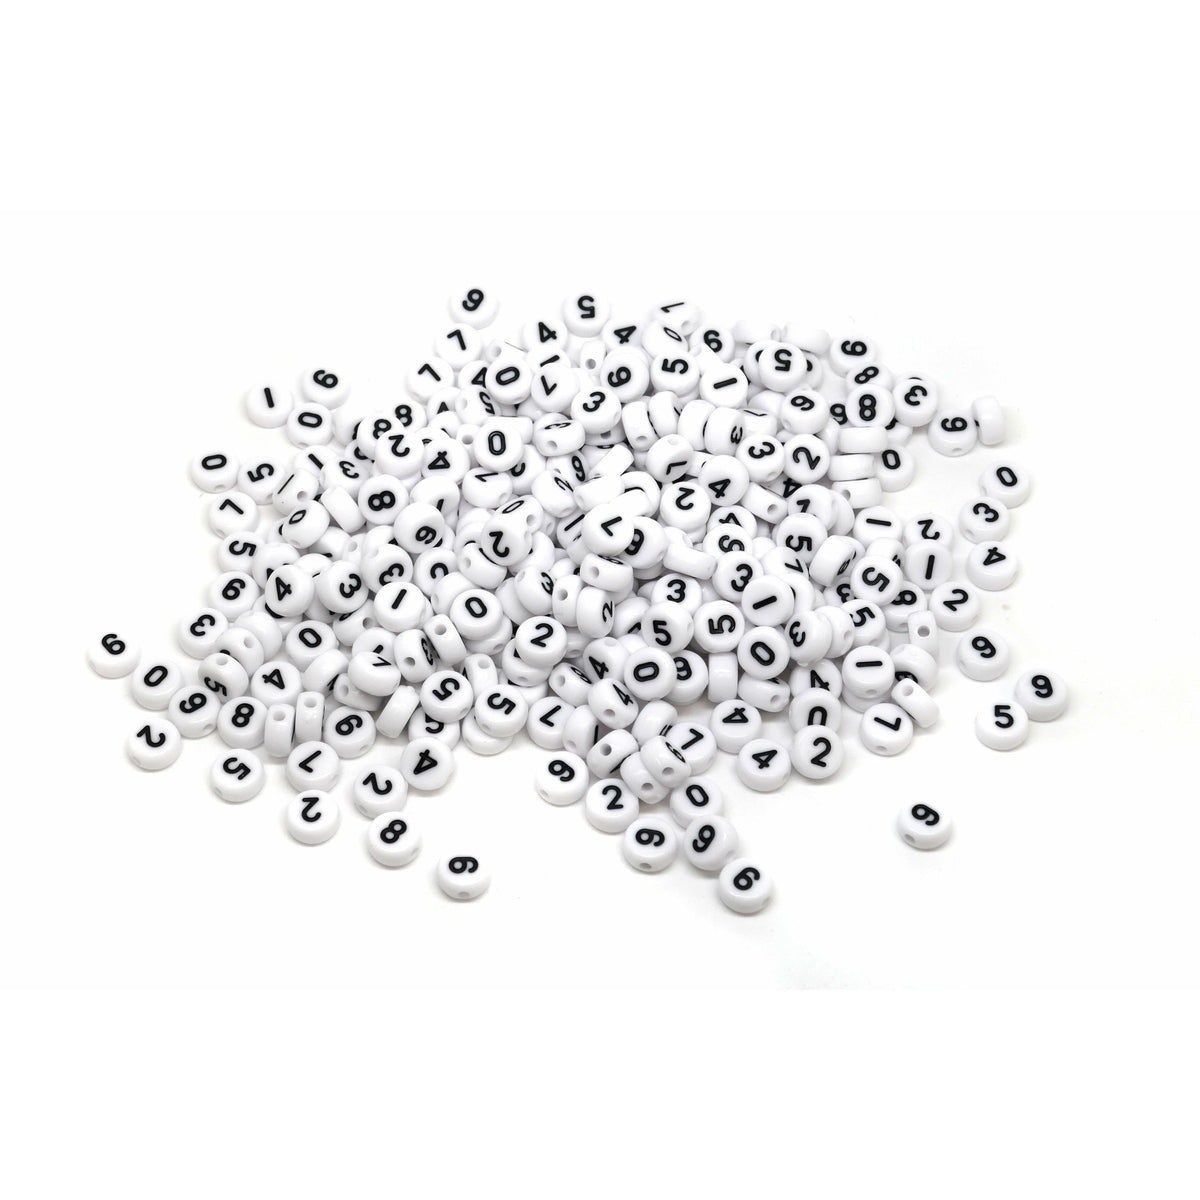 7mm Number Beads, 7mm Black and White Beads, Round Letter Beads, Numbers -   Israel